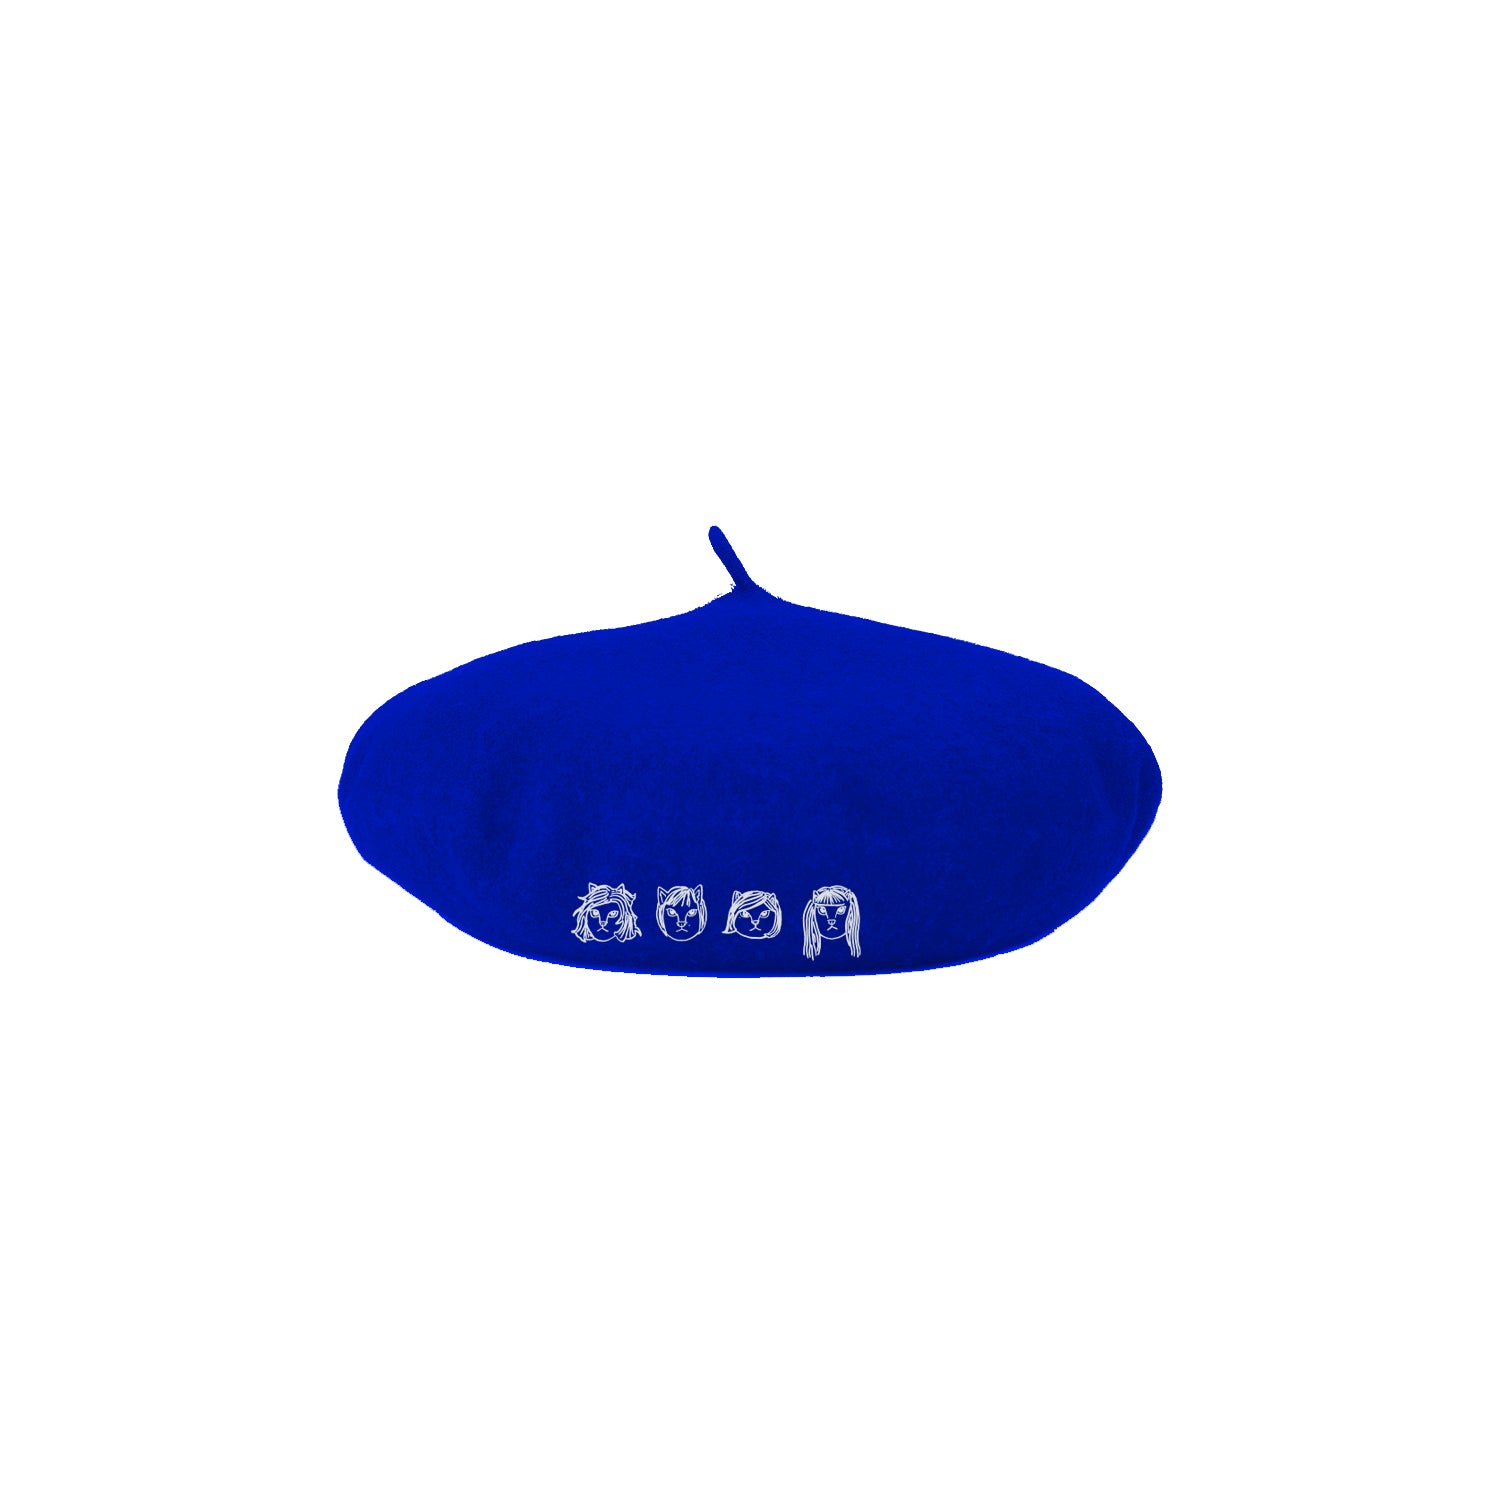  Image of a blue beret hat against a white background. The hat features drawings of 4 different cat faces in white- three have shorter hair and one has longer hair. Below this in white text reads "the linda lindas". The cat faces are embroidered.